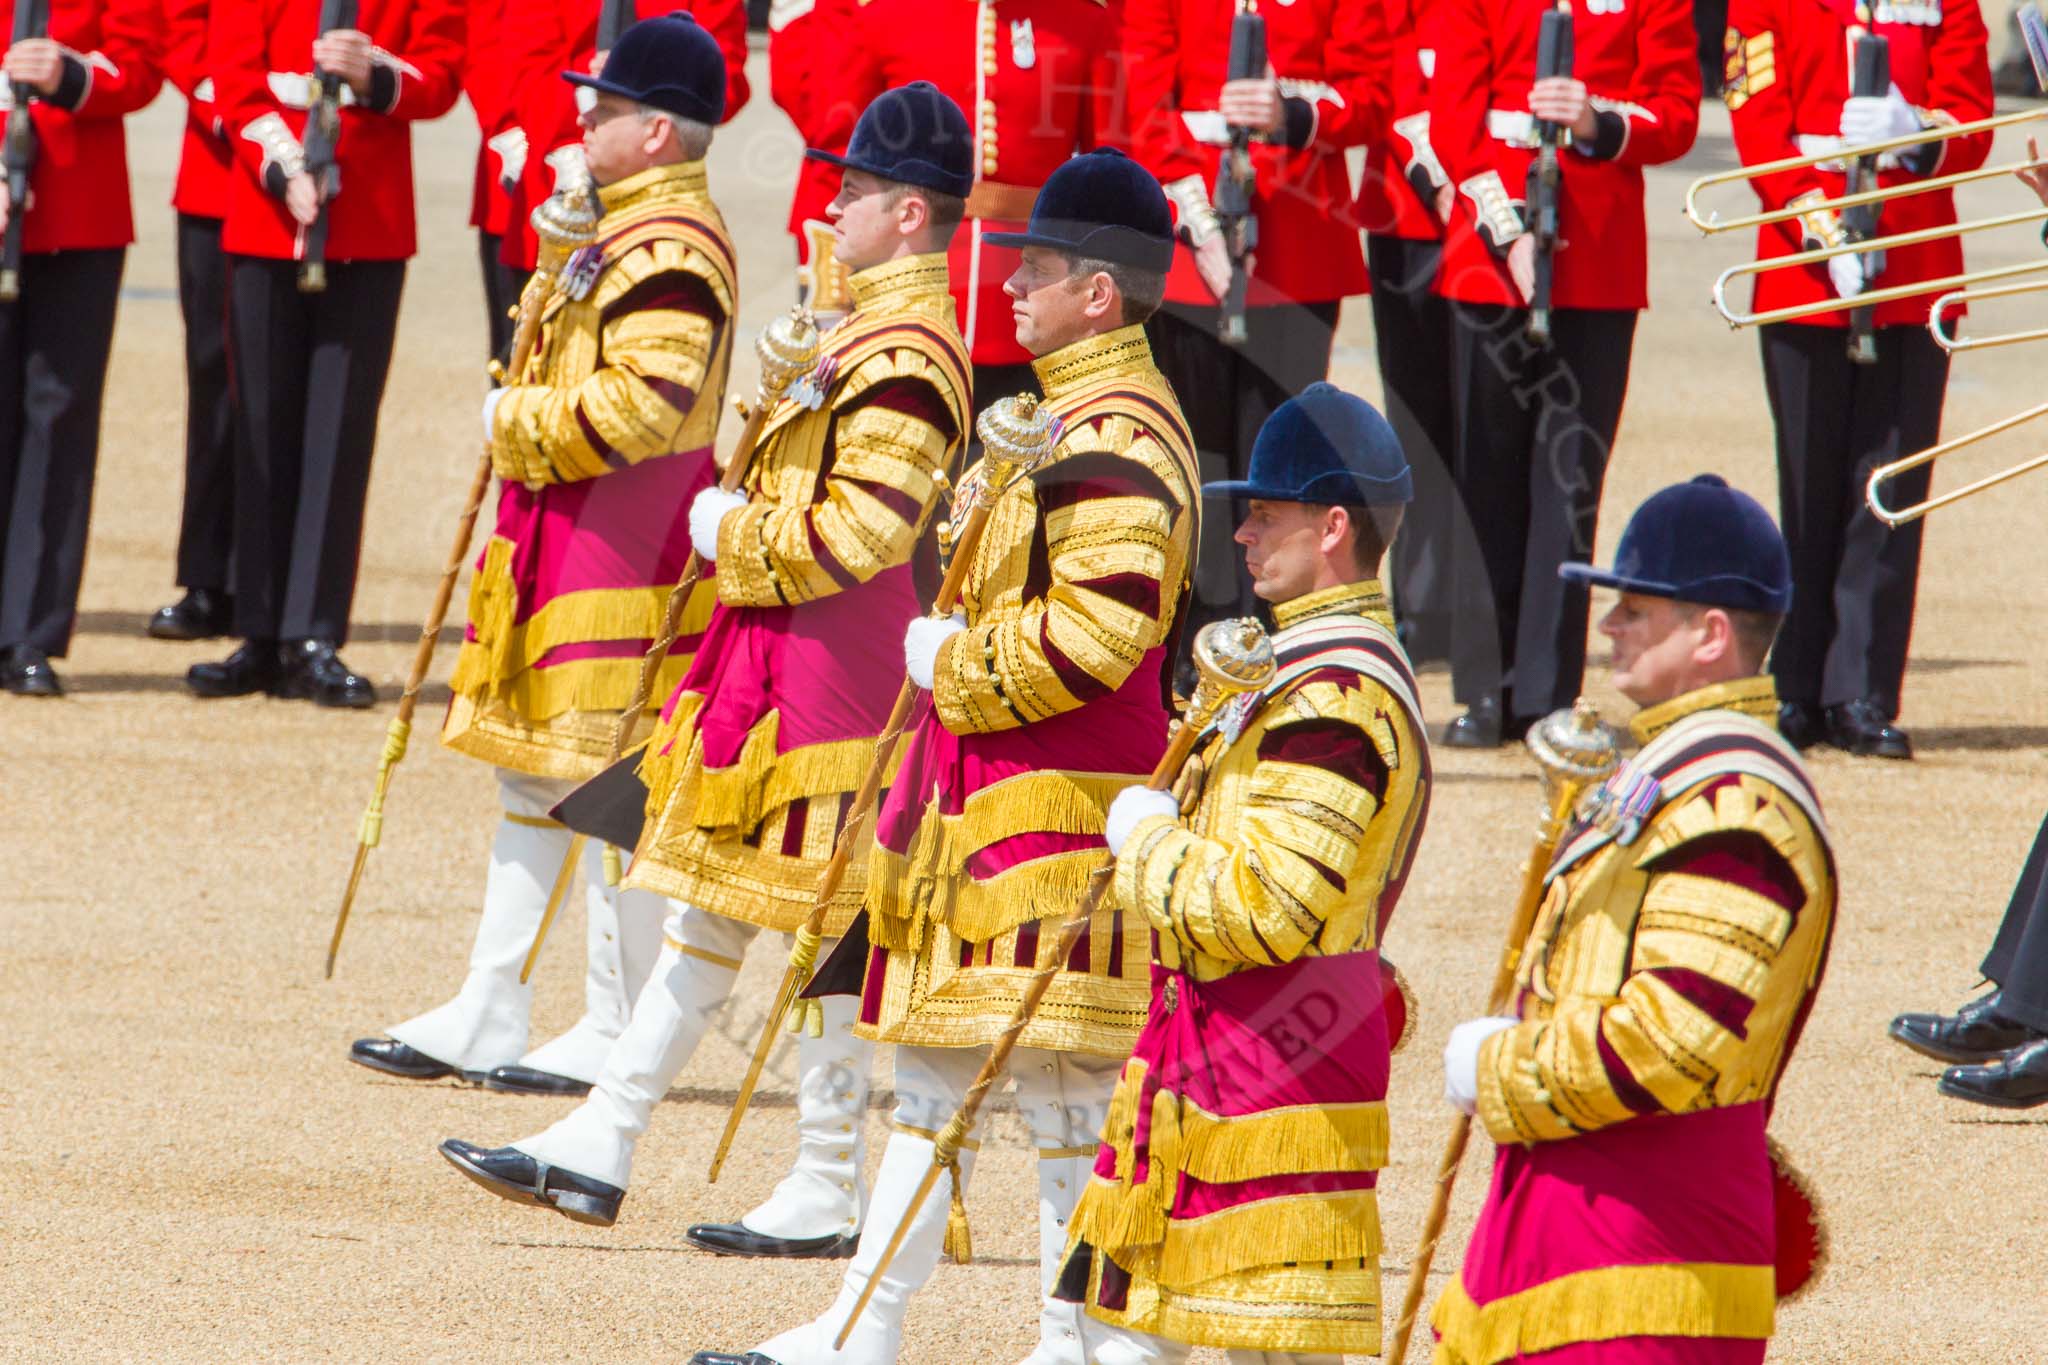 The Colonel's Review 2013: The five Drum Majors leading the Massed Bands as they are playing the Grenadiers Slow March..
Horse Guards Parade, Westminster,
London SW1,

United Kingdom,
on 08 June 2013 at 11:23, image #555